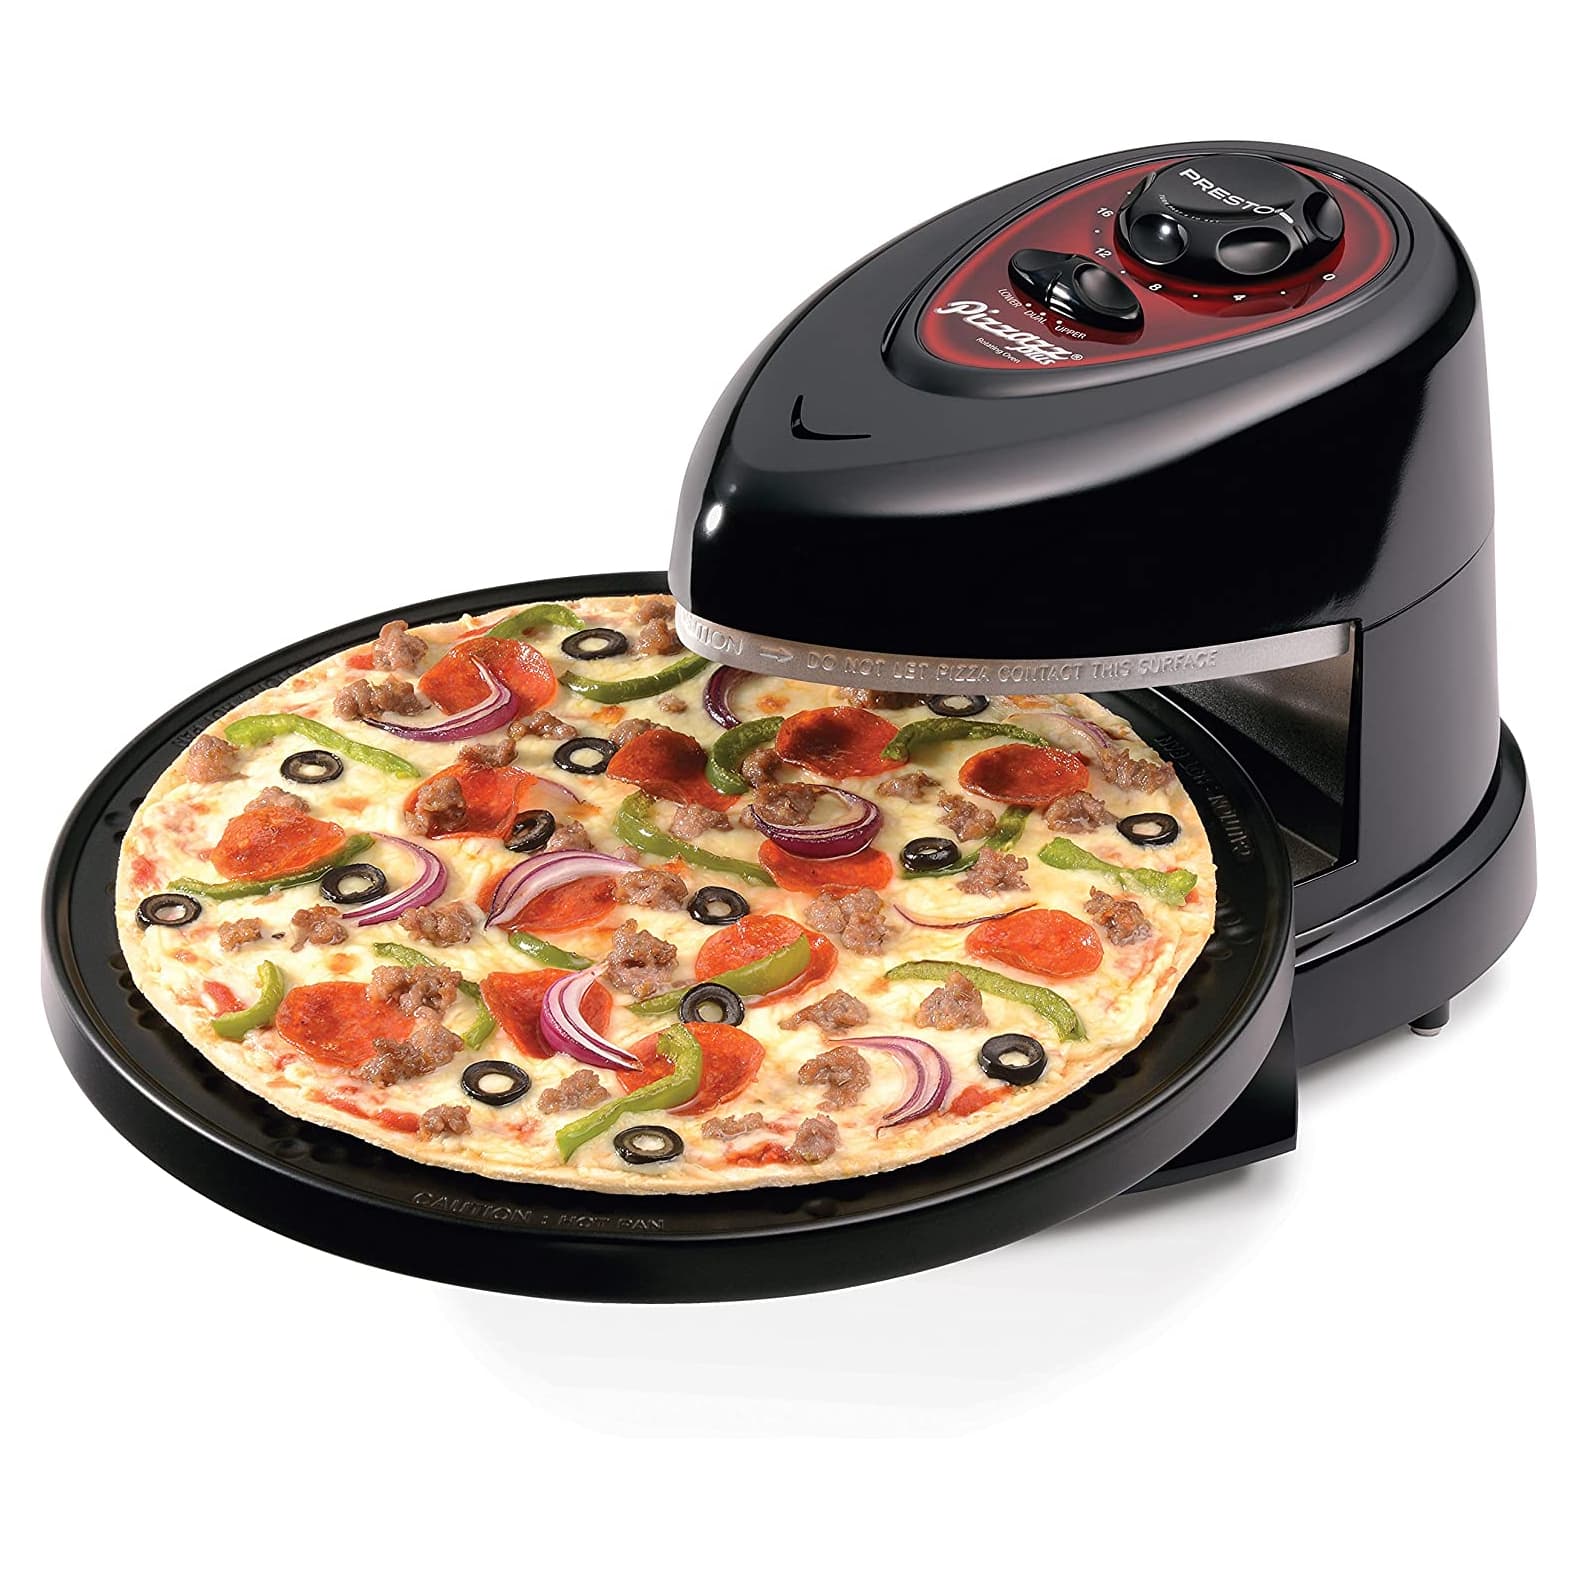 http://cdn.apartmenttherapy.info/image/upload/v1690468185/gen-workflow/product-database/presto-pizzazz-plus-rotating-oven-amazon.jpg